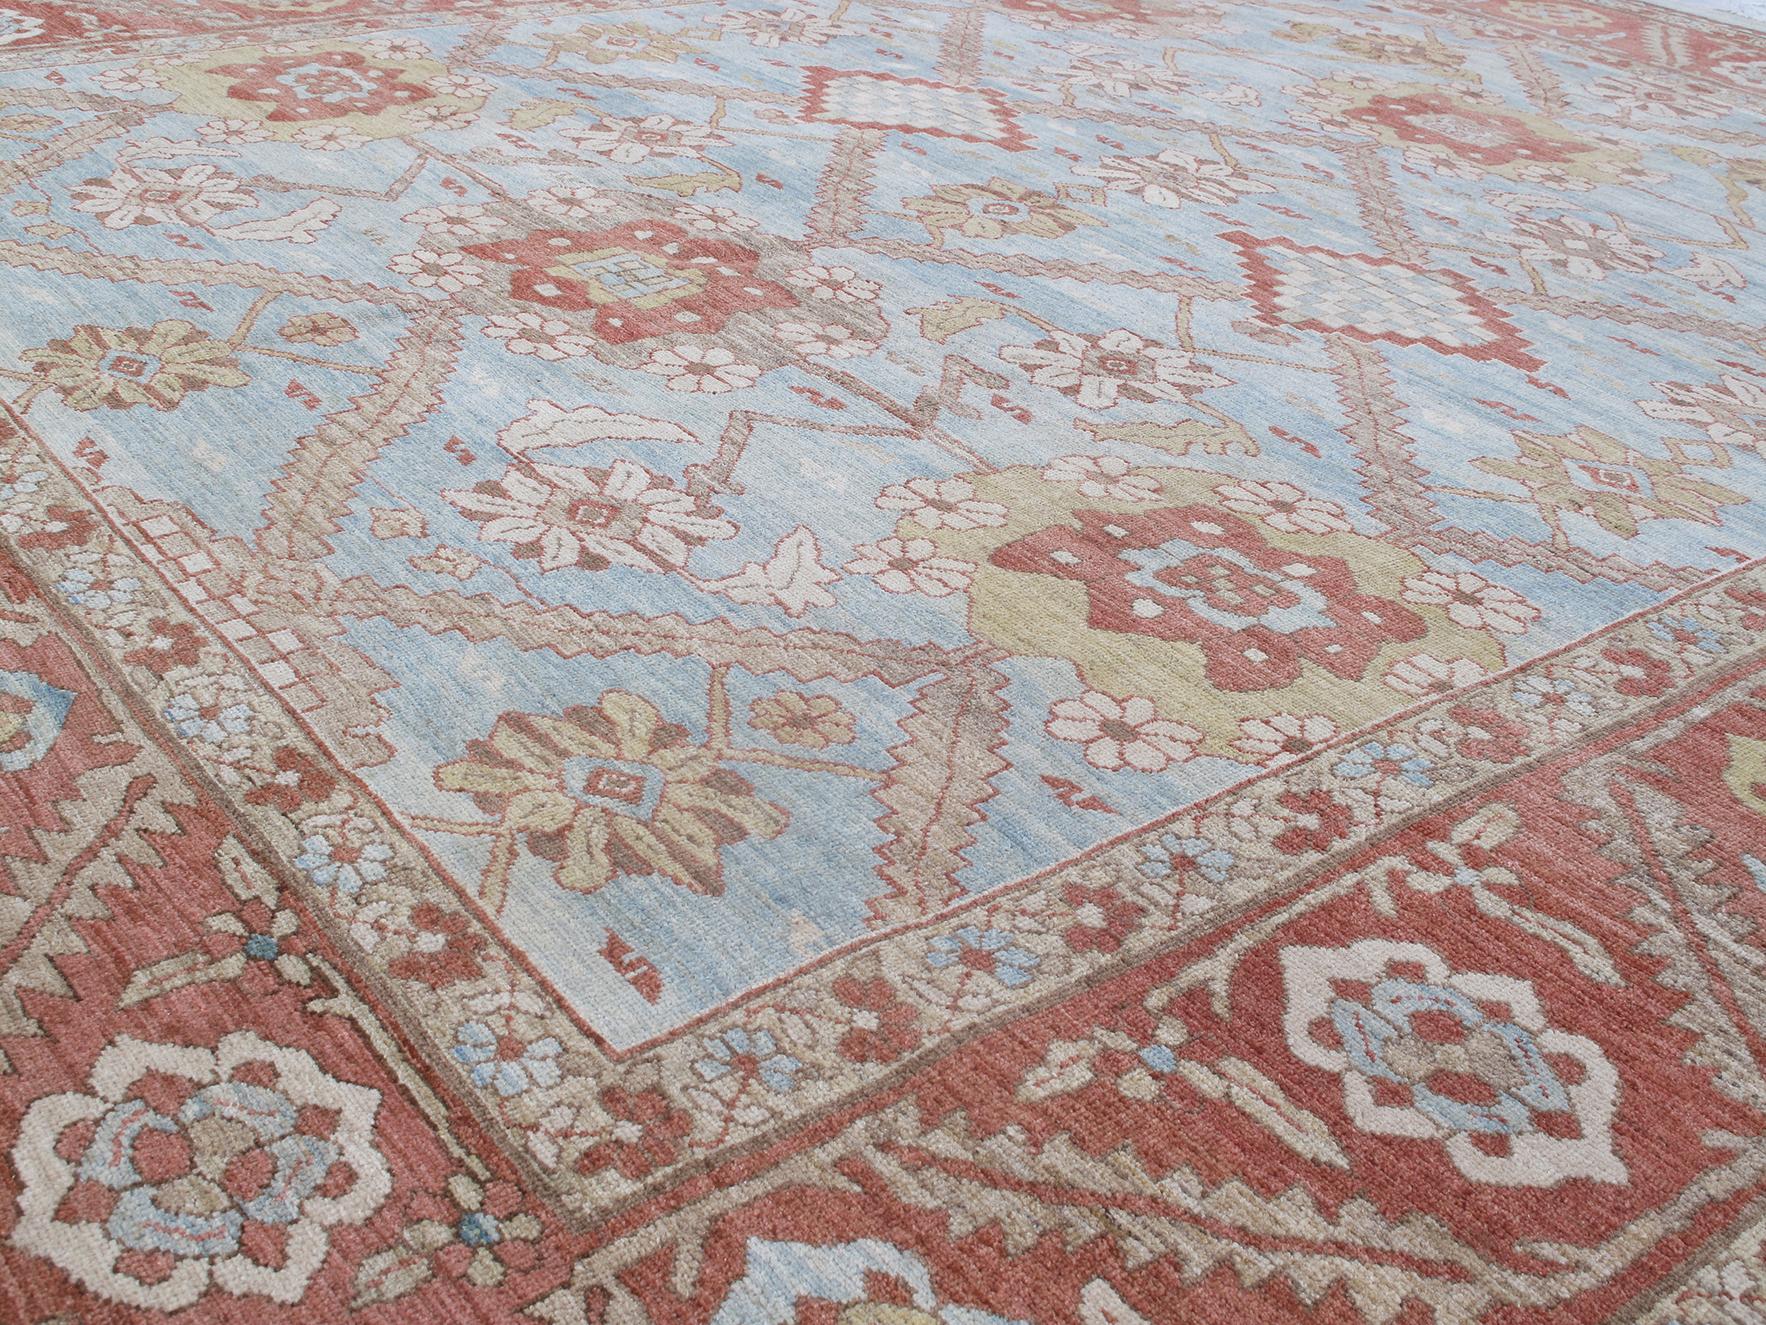 Made in Iran with the highest quality Persian hand-carded, hand-spun-wool and all vegetable dyes, this rug resembles the original prized antique Bakshaish rugs made in town of the same name. Located in the Heris region, it's noted as an area for